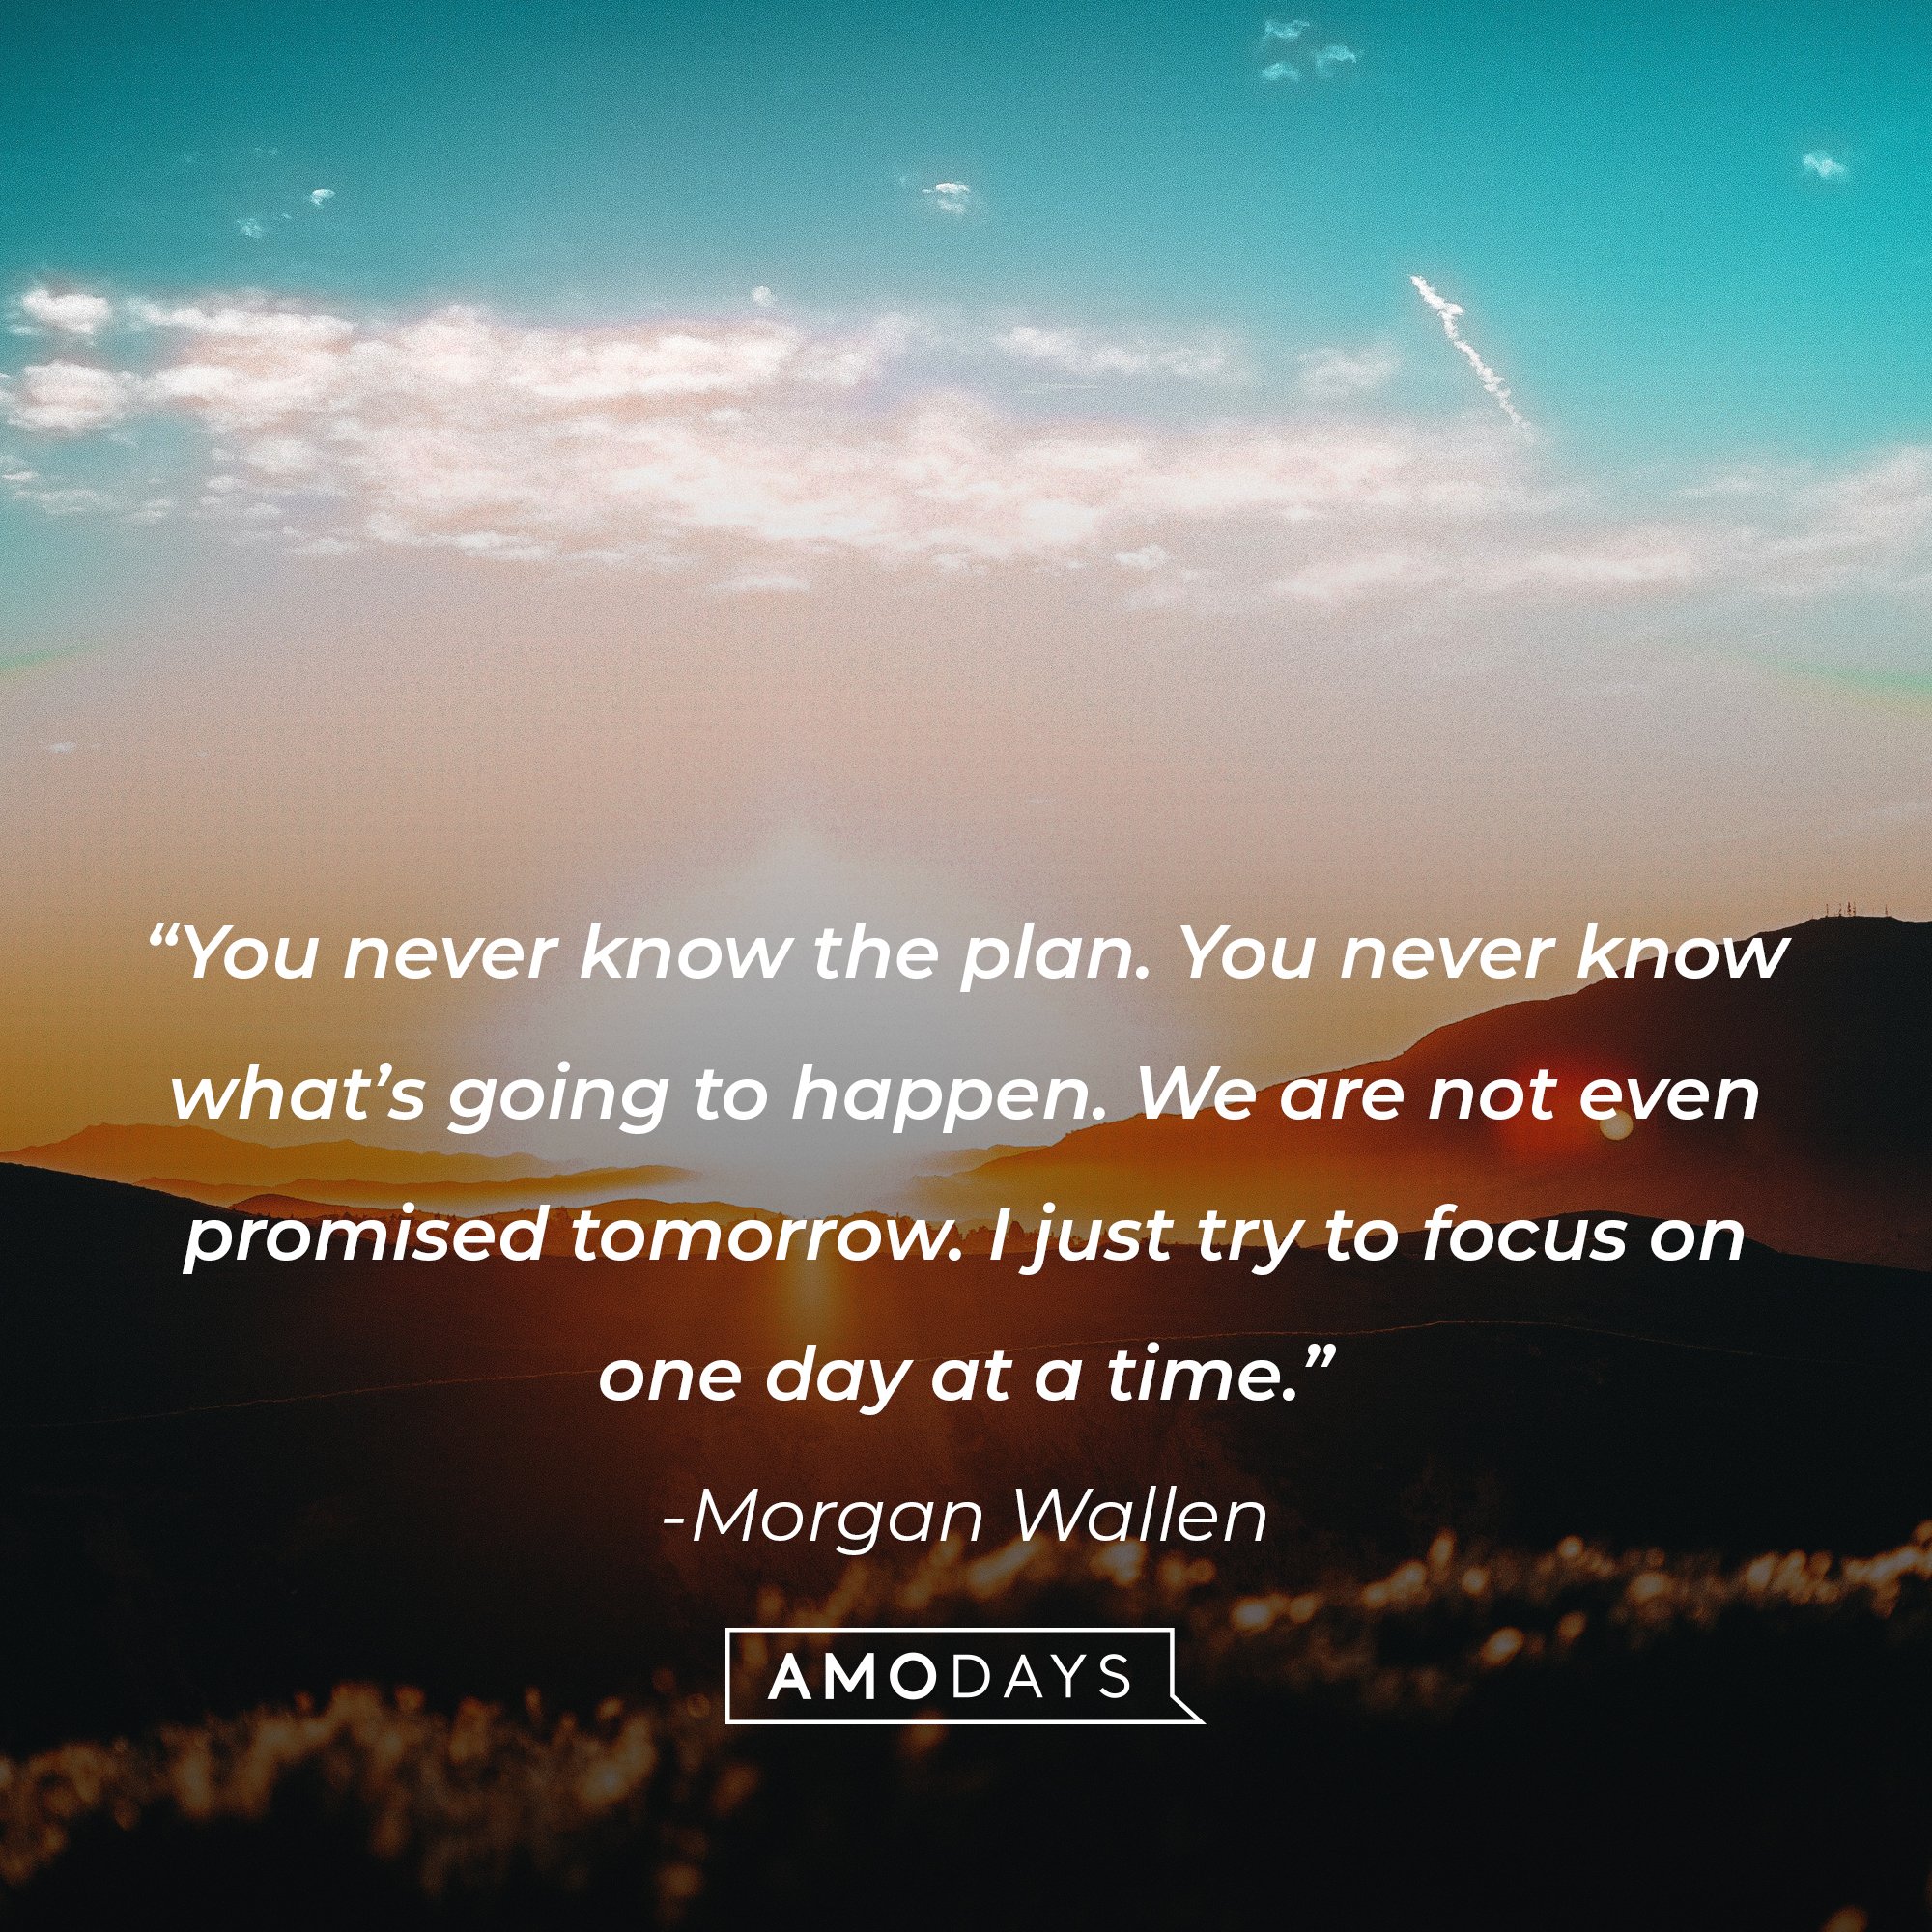  Morgan Wallen’s quote: “You never know the plan. You never know what’s going to happen. We are not even promised tomorrow. I just try to focus on one day at a time.” |  Image: AmoDays